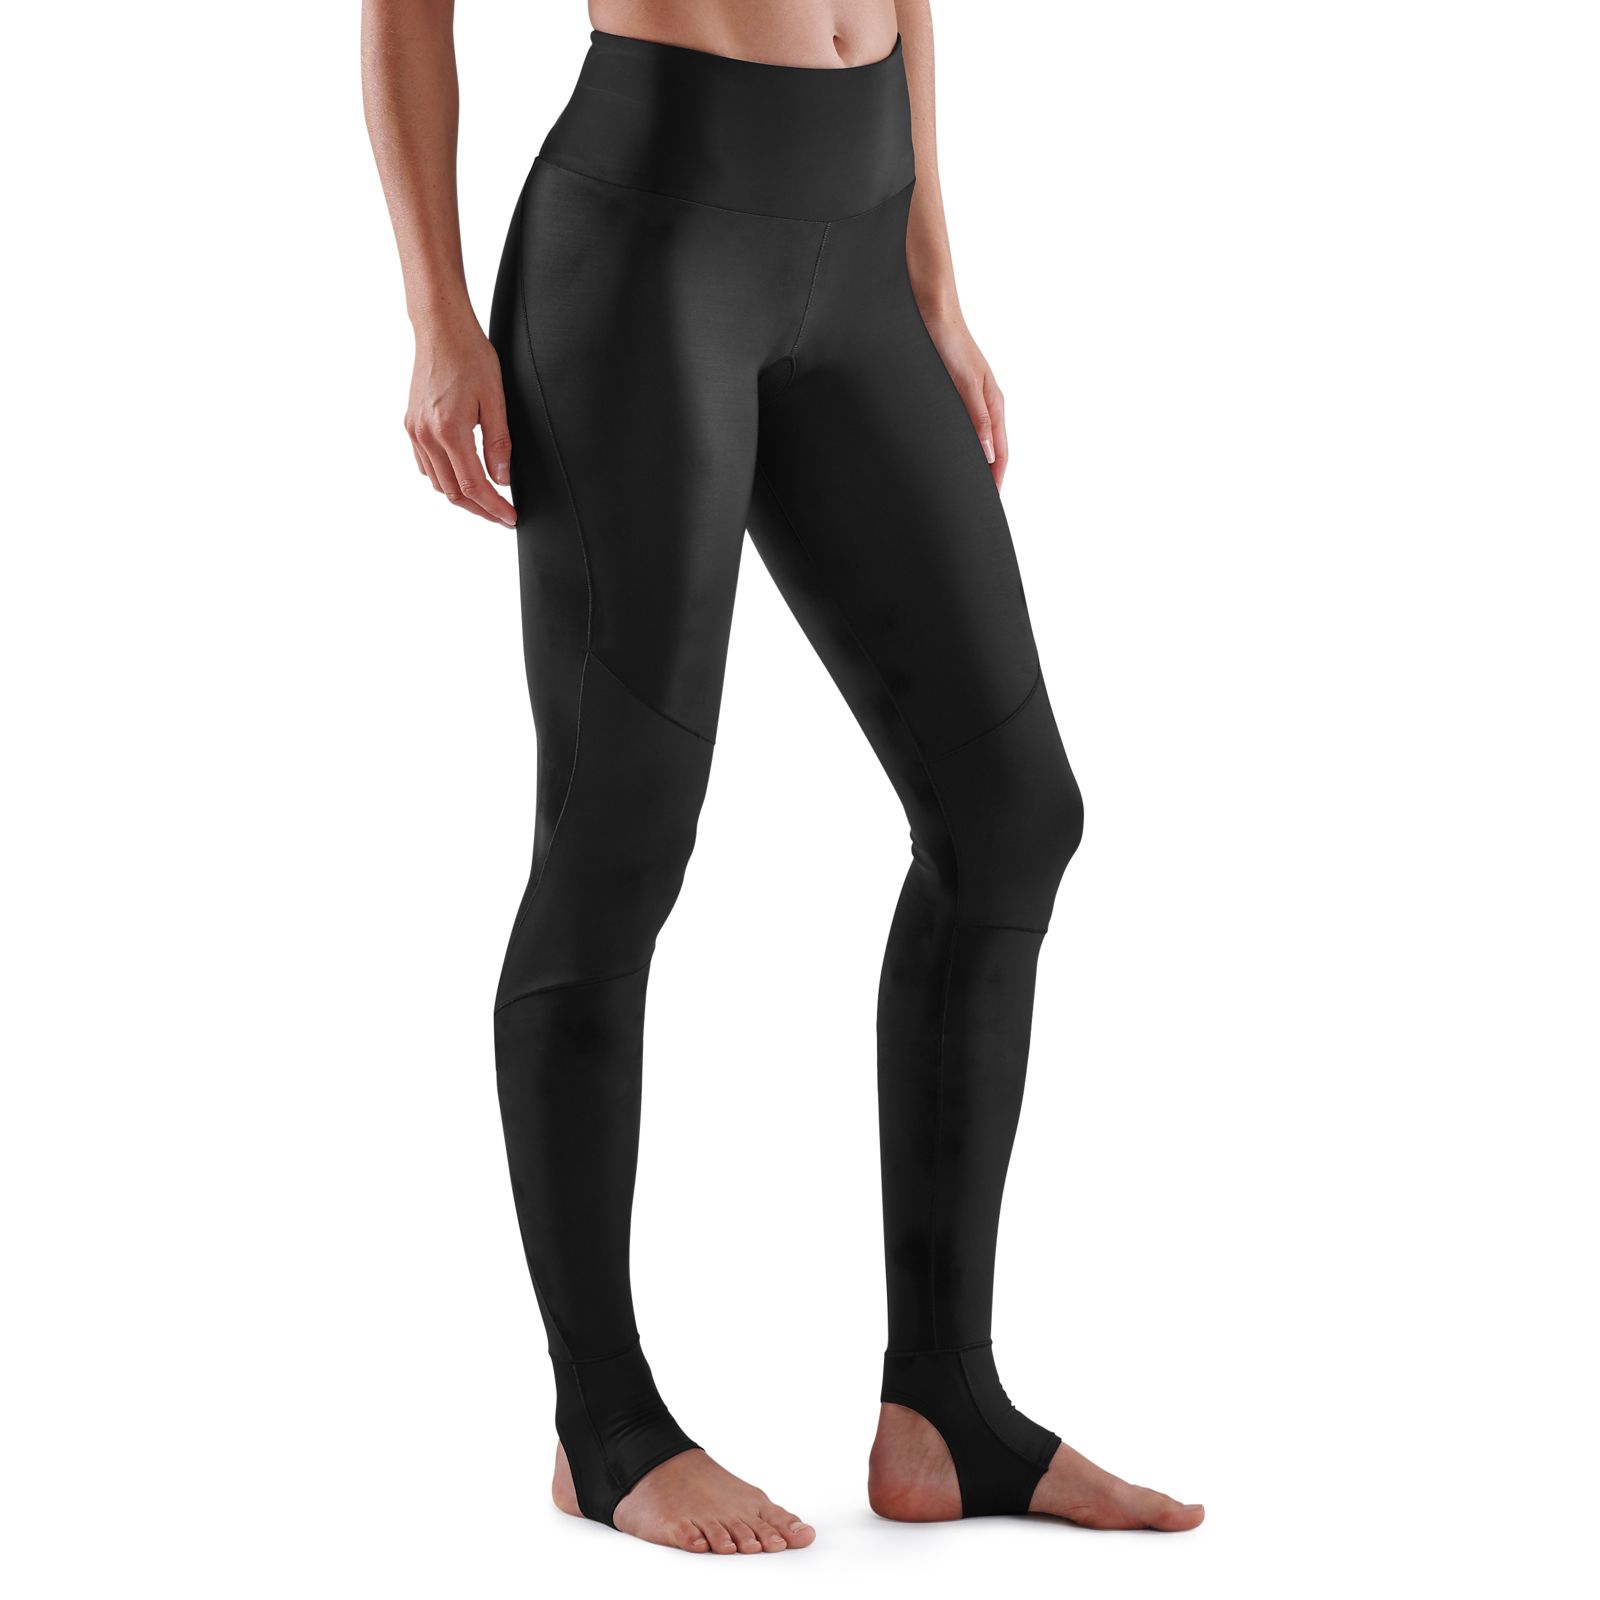 Skins Compression Women's Series-5 Long Tights